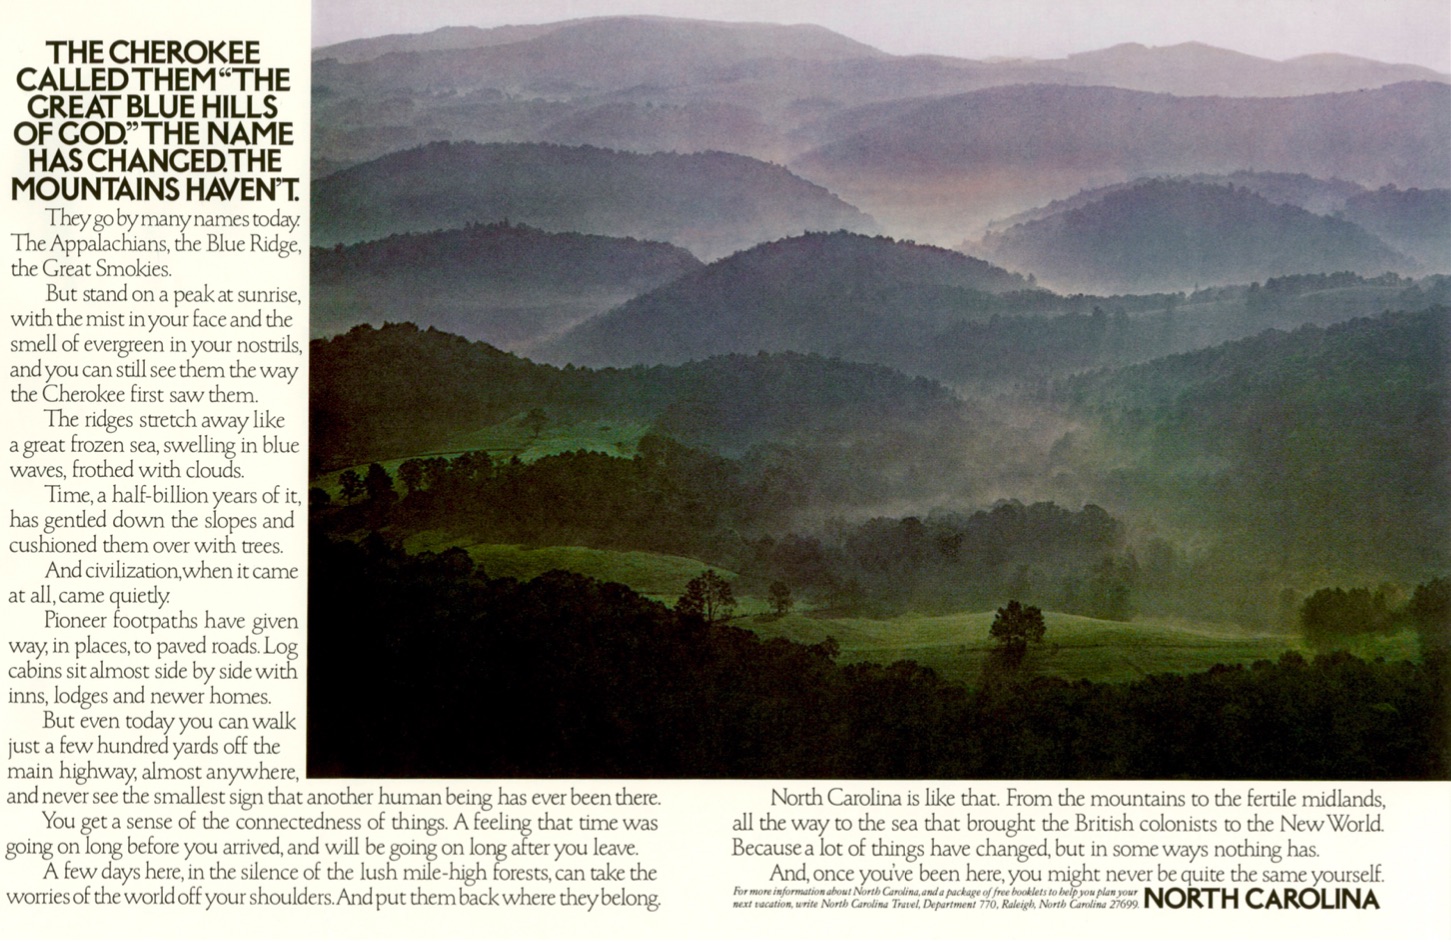 Norht Carolina: The Cherokee called them "The Great Blue Hills of God." The name has changed. The mountains haven't.